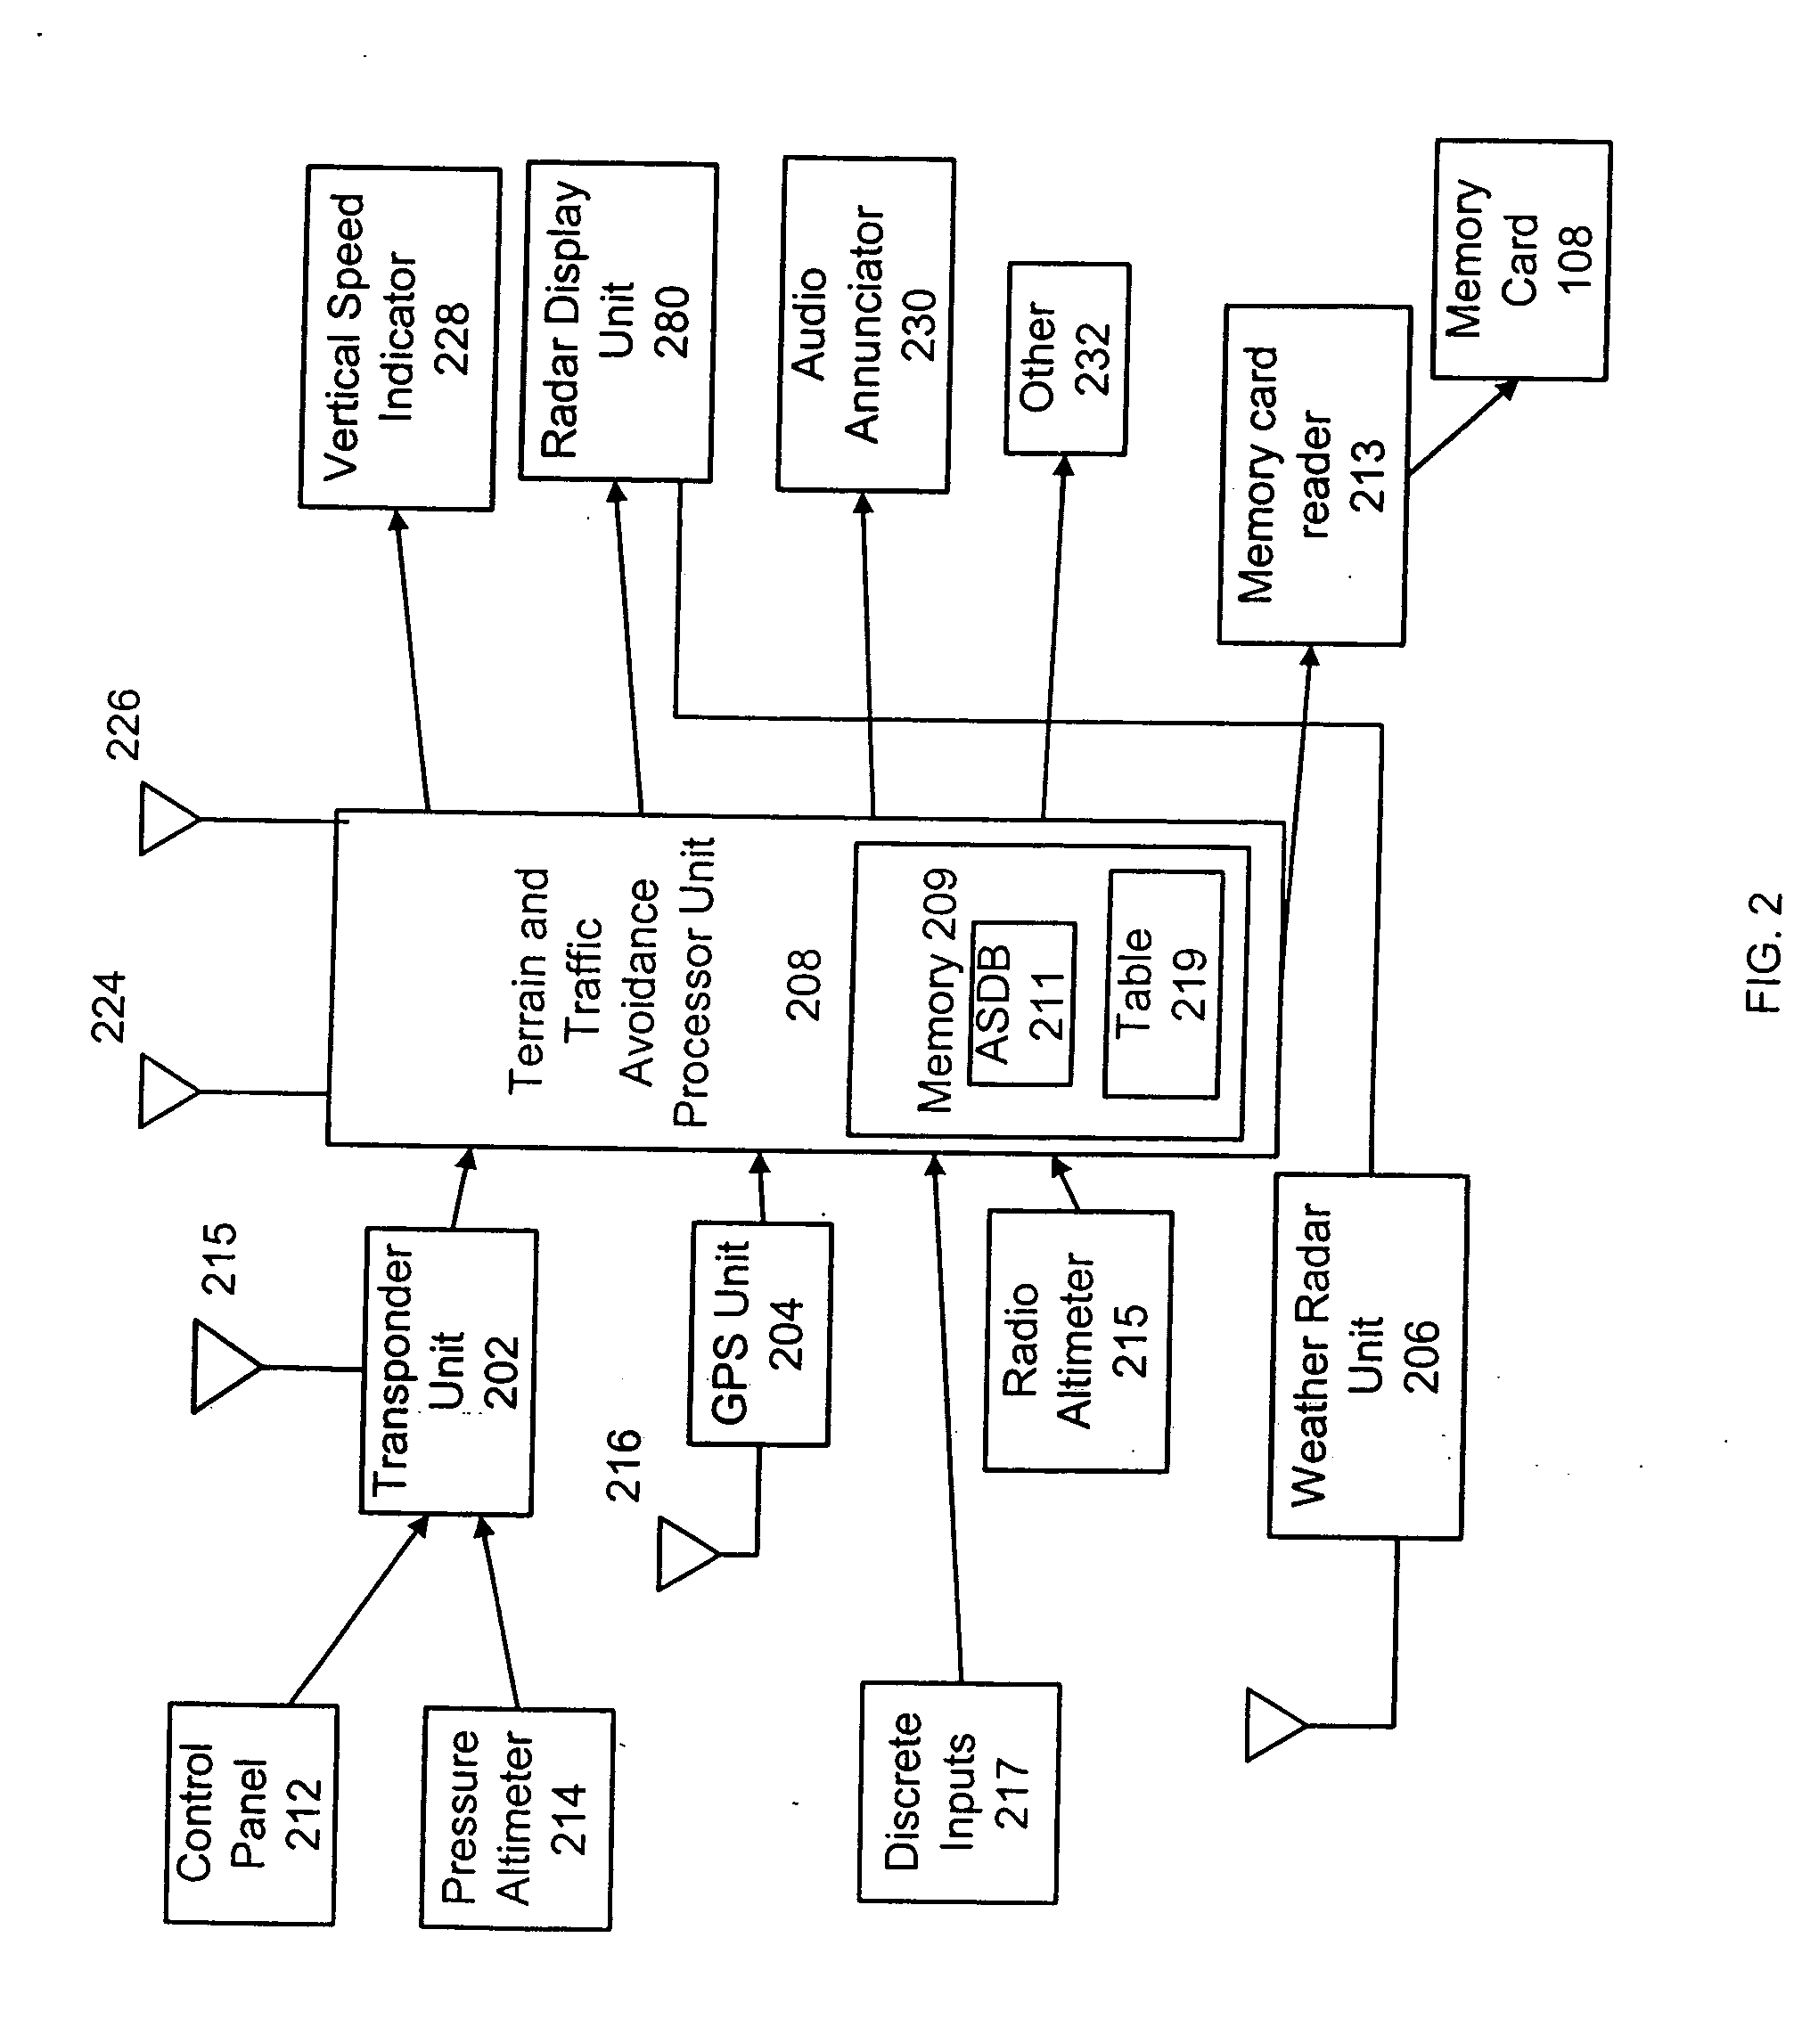 Method and system for recording system information